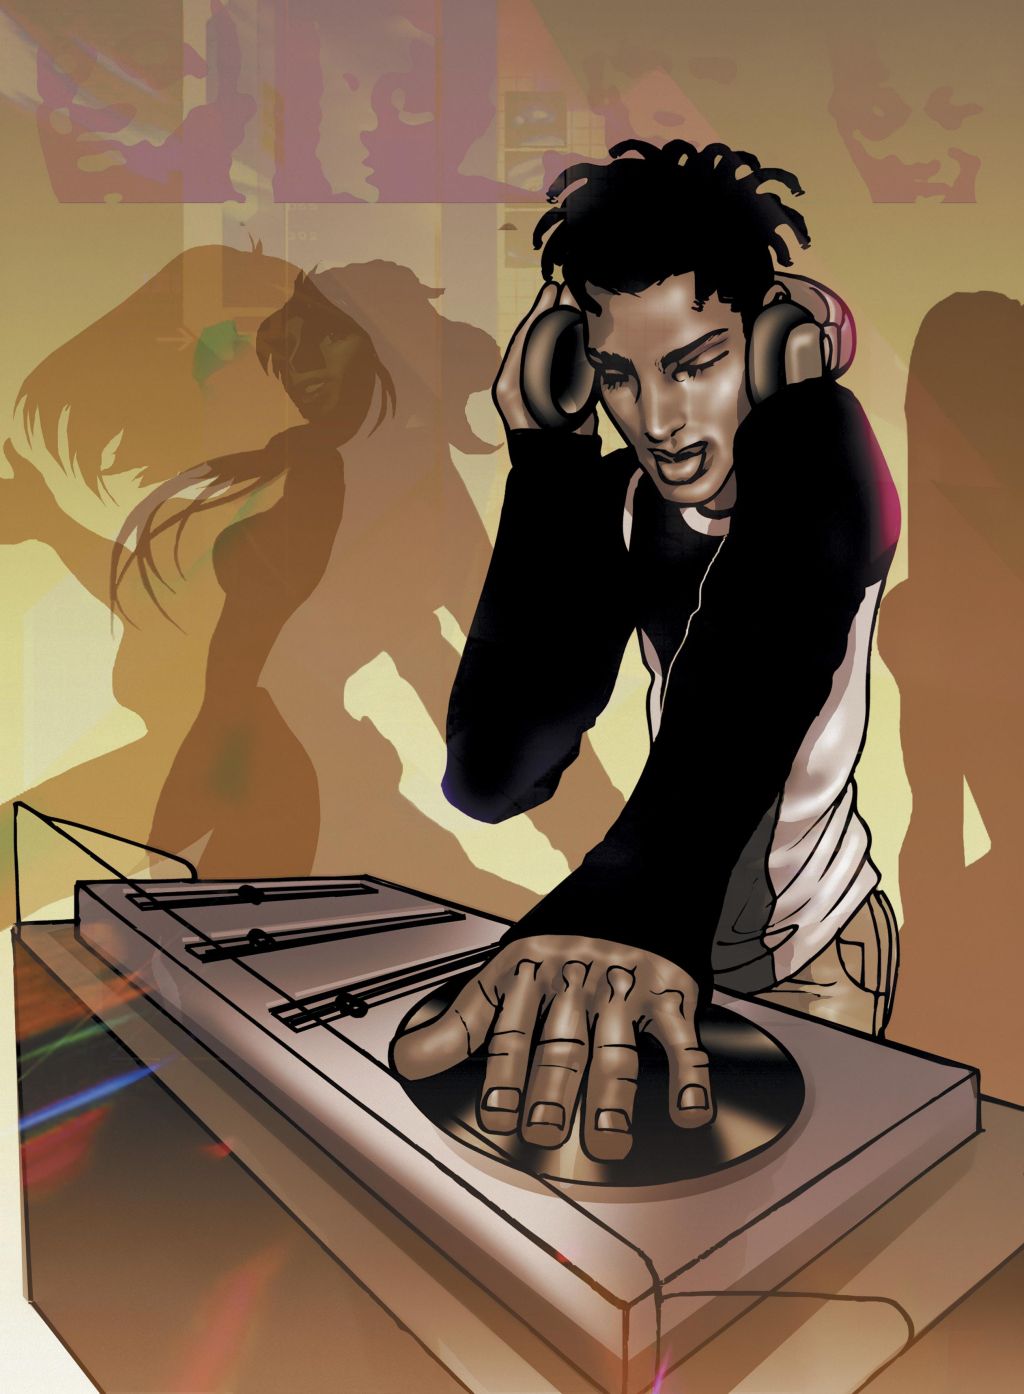 Portrait of a Young Dj Putting on a Record on a Turntable in a Nightclub